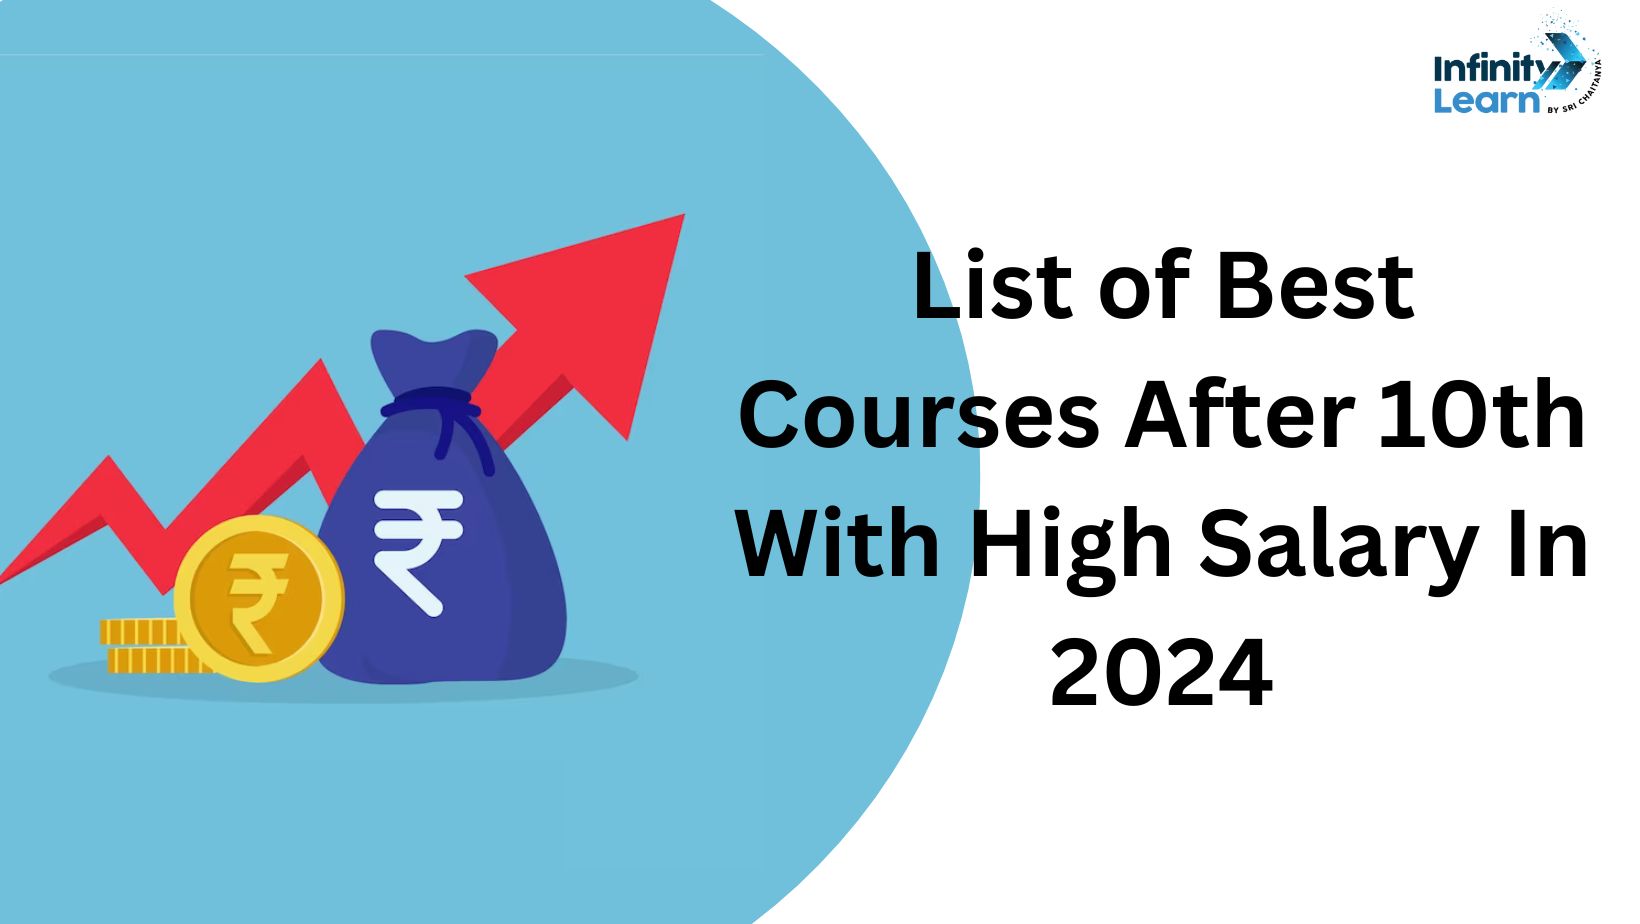 List of Best Courses After 10th With High Salary In 2024